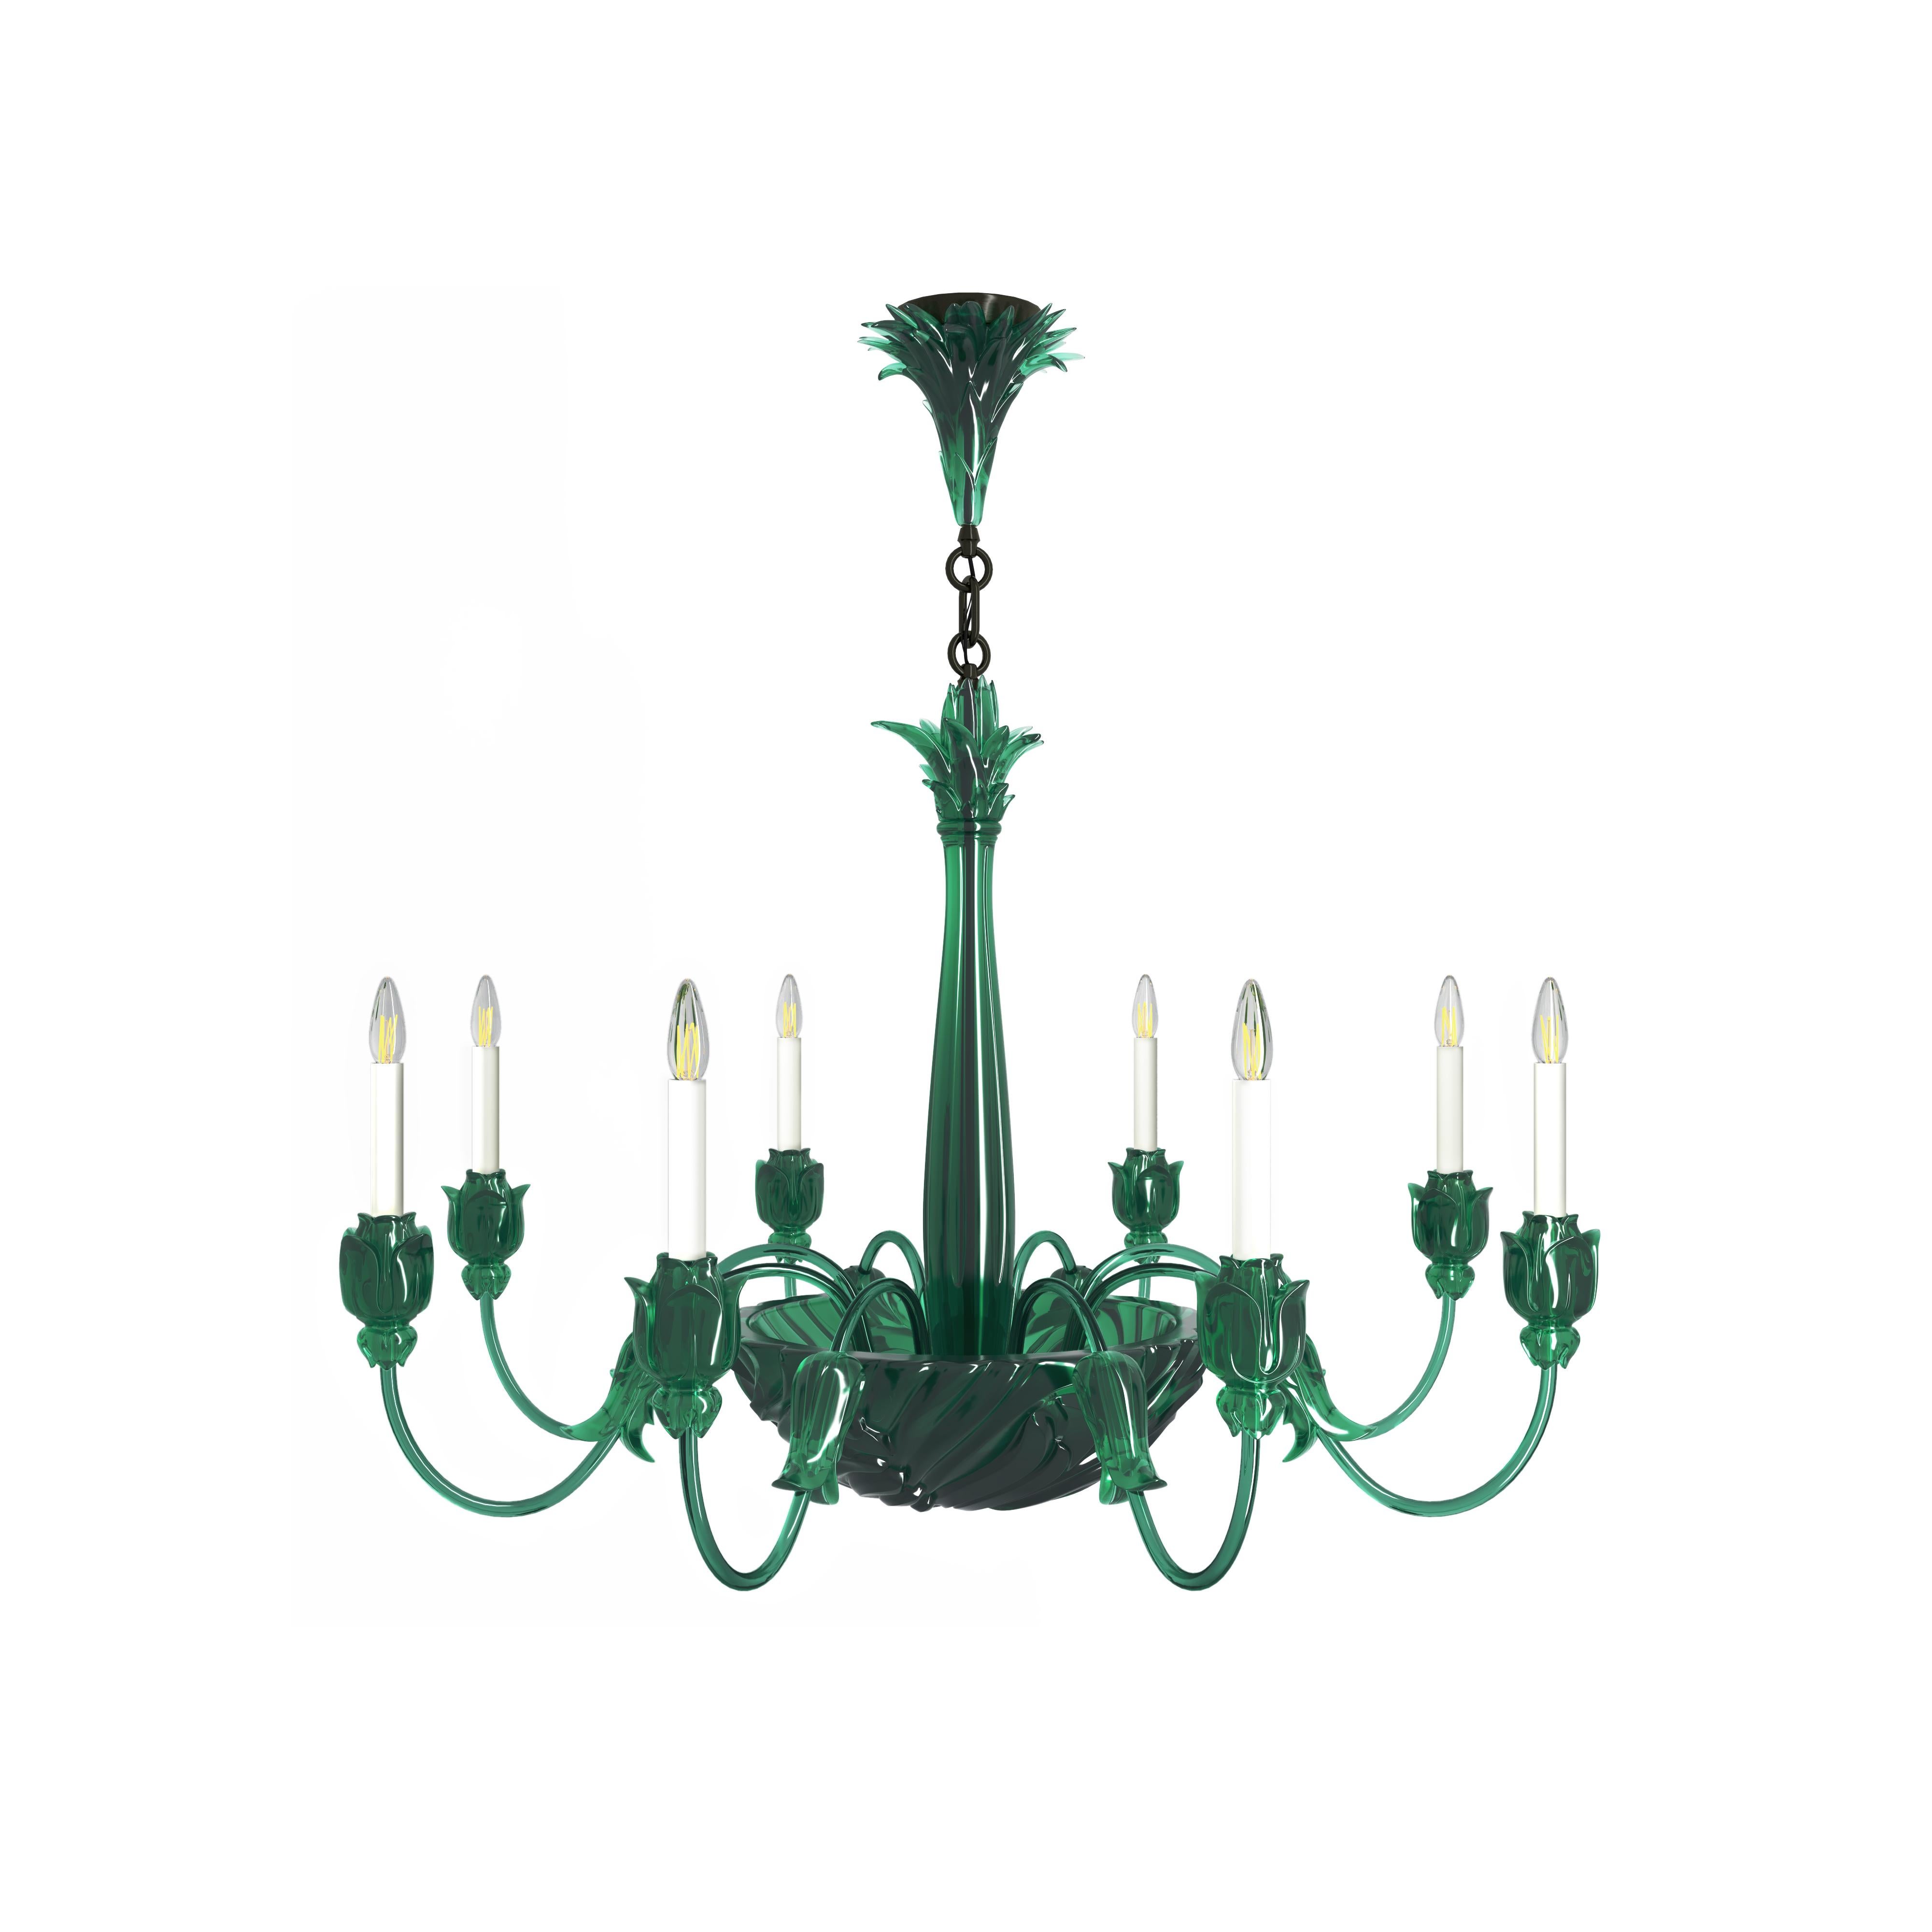 A single-tiered, eight-light chandelier in a colorful transparent emerald resin, designed by David Duncan. This chandelier features an elegant shell formed dish, which is secured on the underside by an over-sized finial. The dish issues candle arms